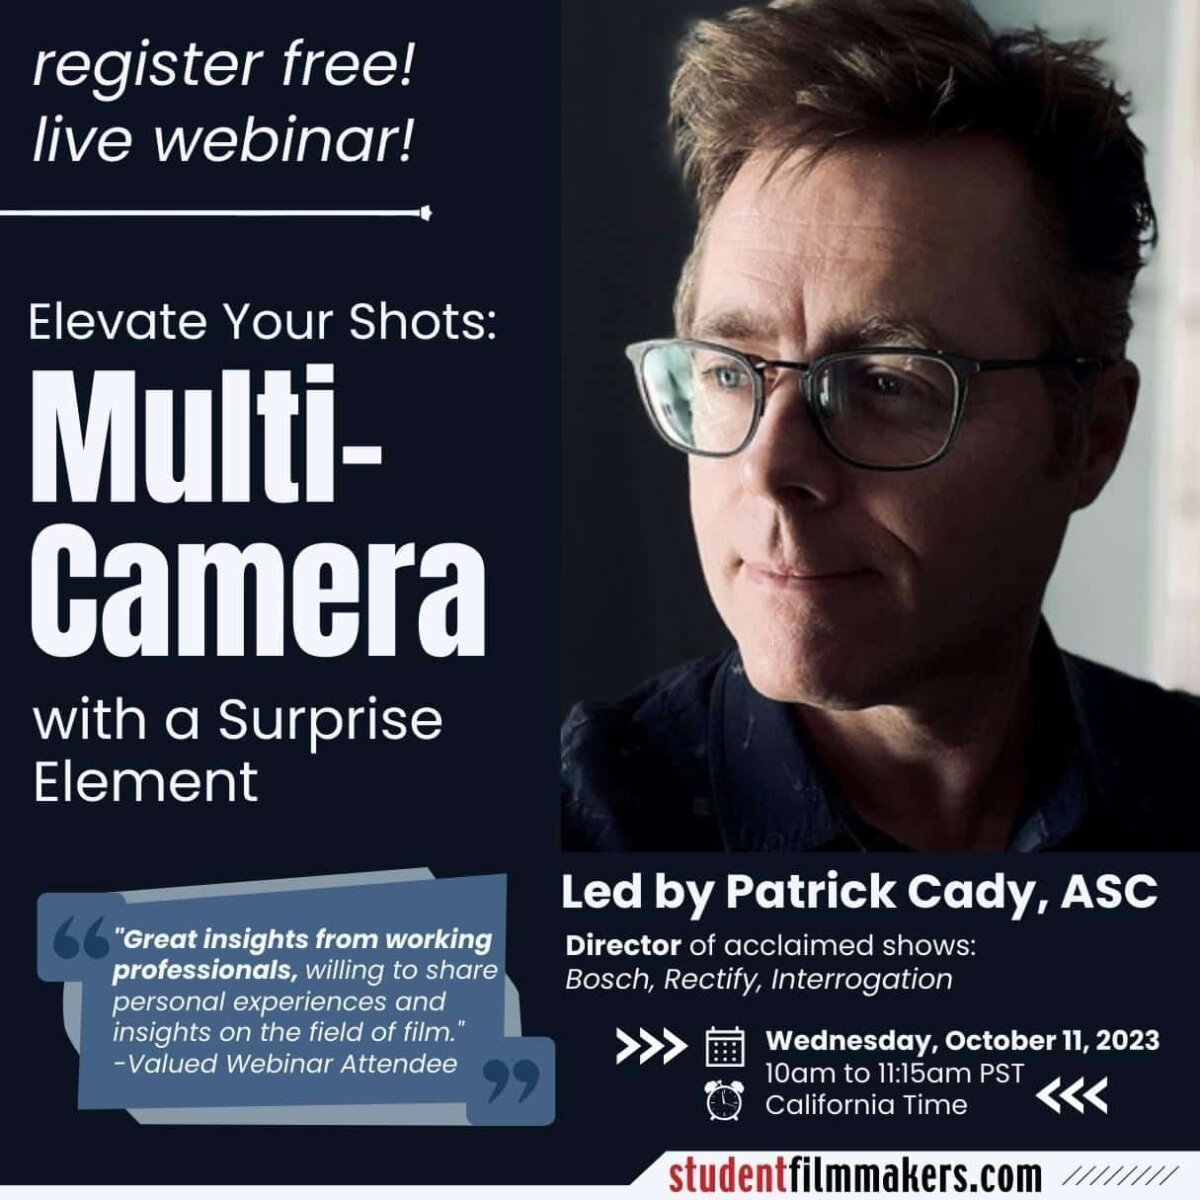 "Elevate Your Shots: Multi-Camera with a Surprise Element" Led by Patrick Cady, ASC, Renowned Director of Acclaimed Shows: "Bosch," "Rectify," and "Interrogation" hosted by StudentFilmmakers.com